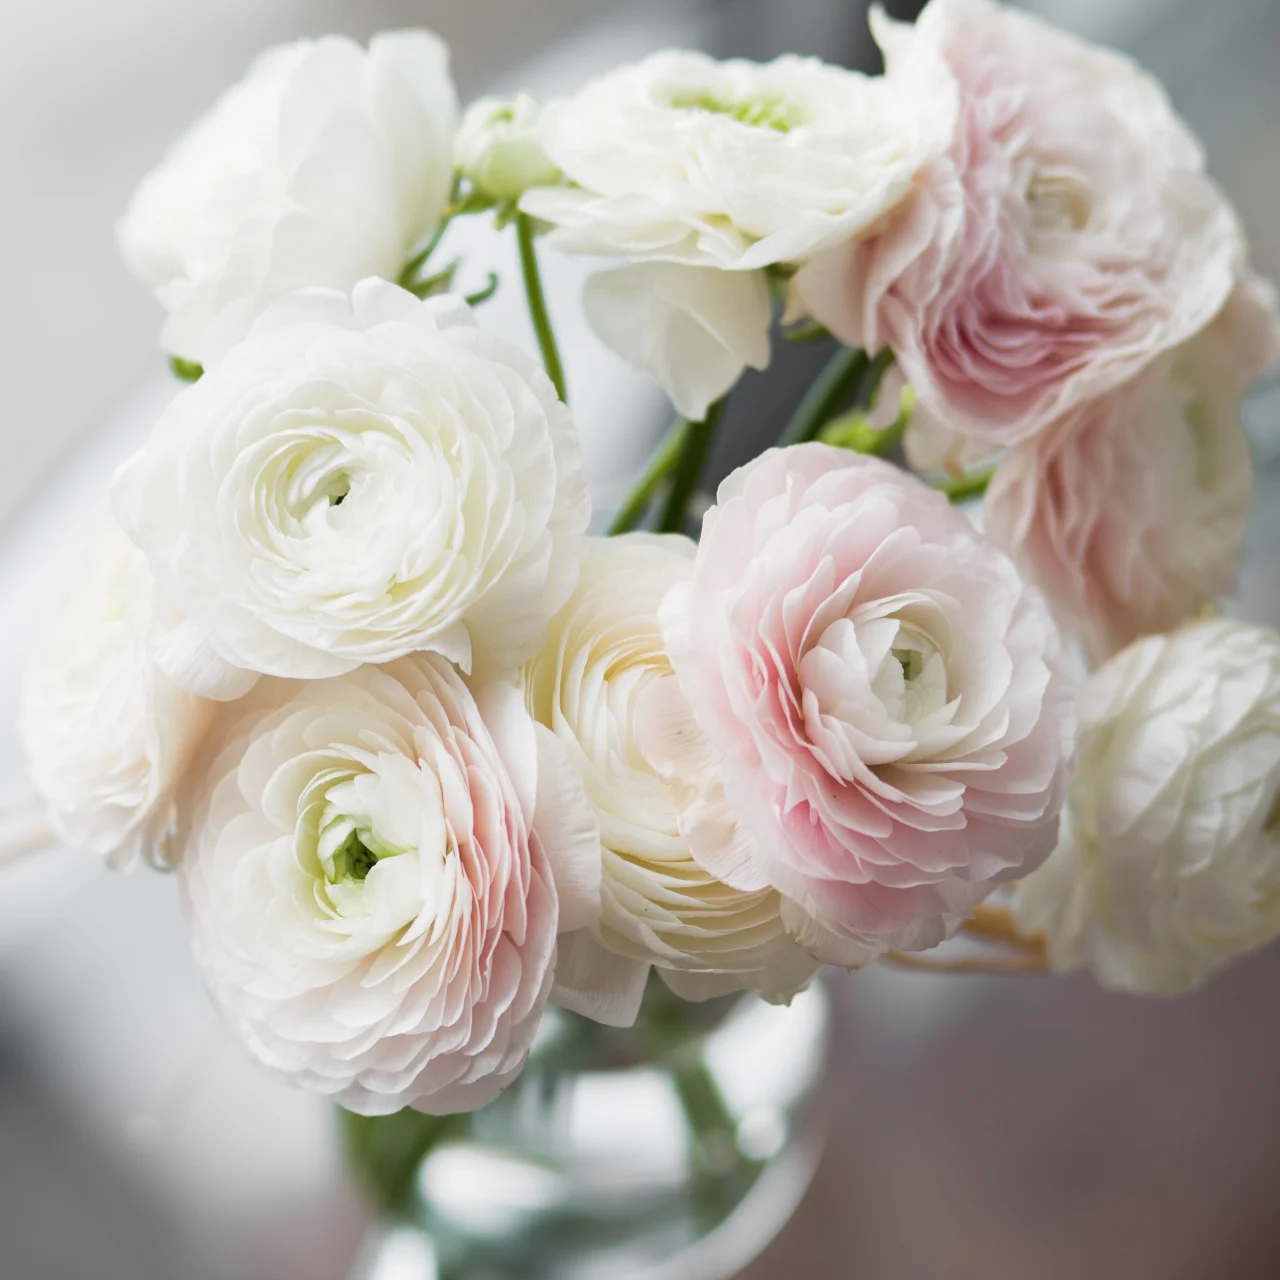 6 Beautiful Roses to Give Your Love on this Rose Day